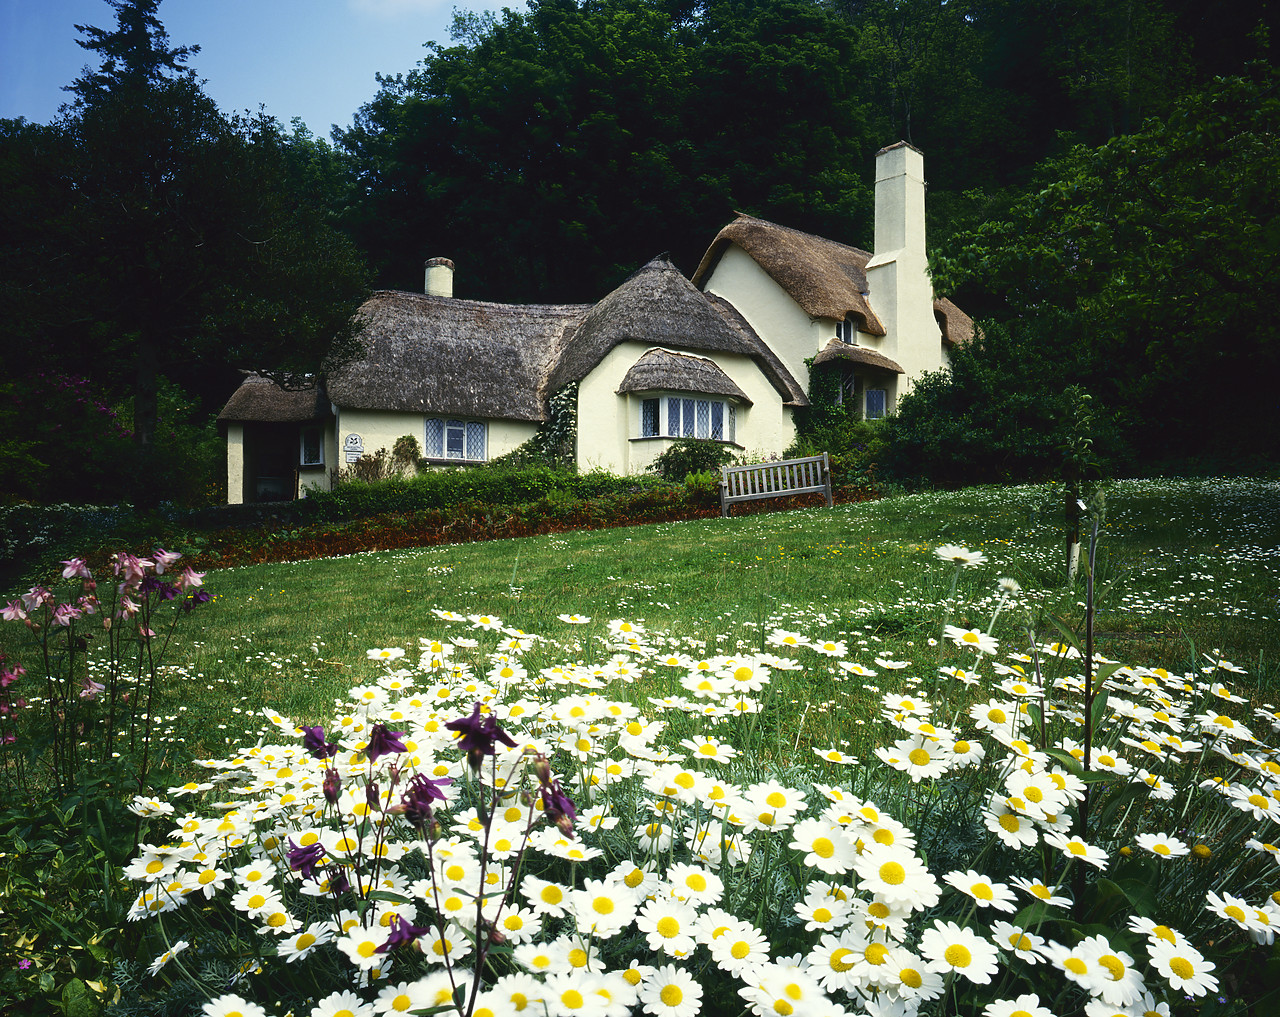 #87889-1 - Selworthy Cottage & Daisies, Somerset, England